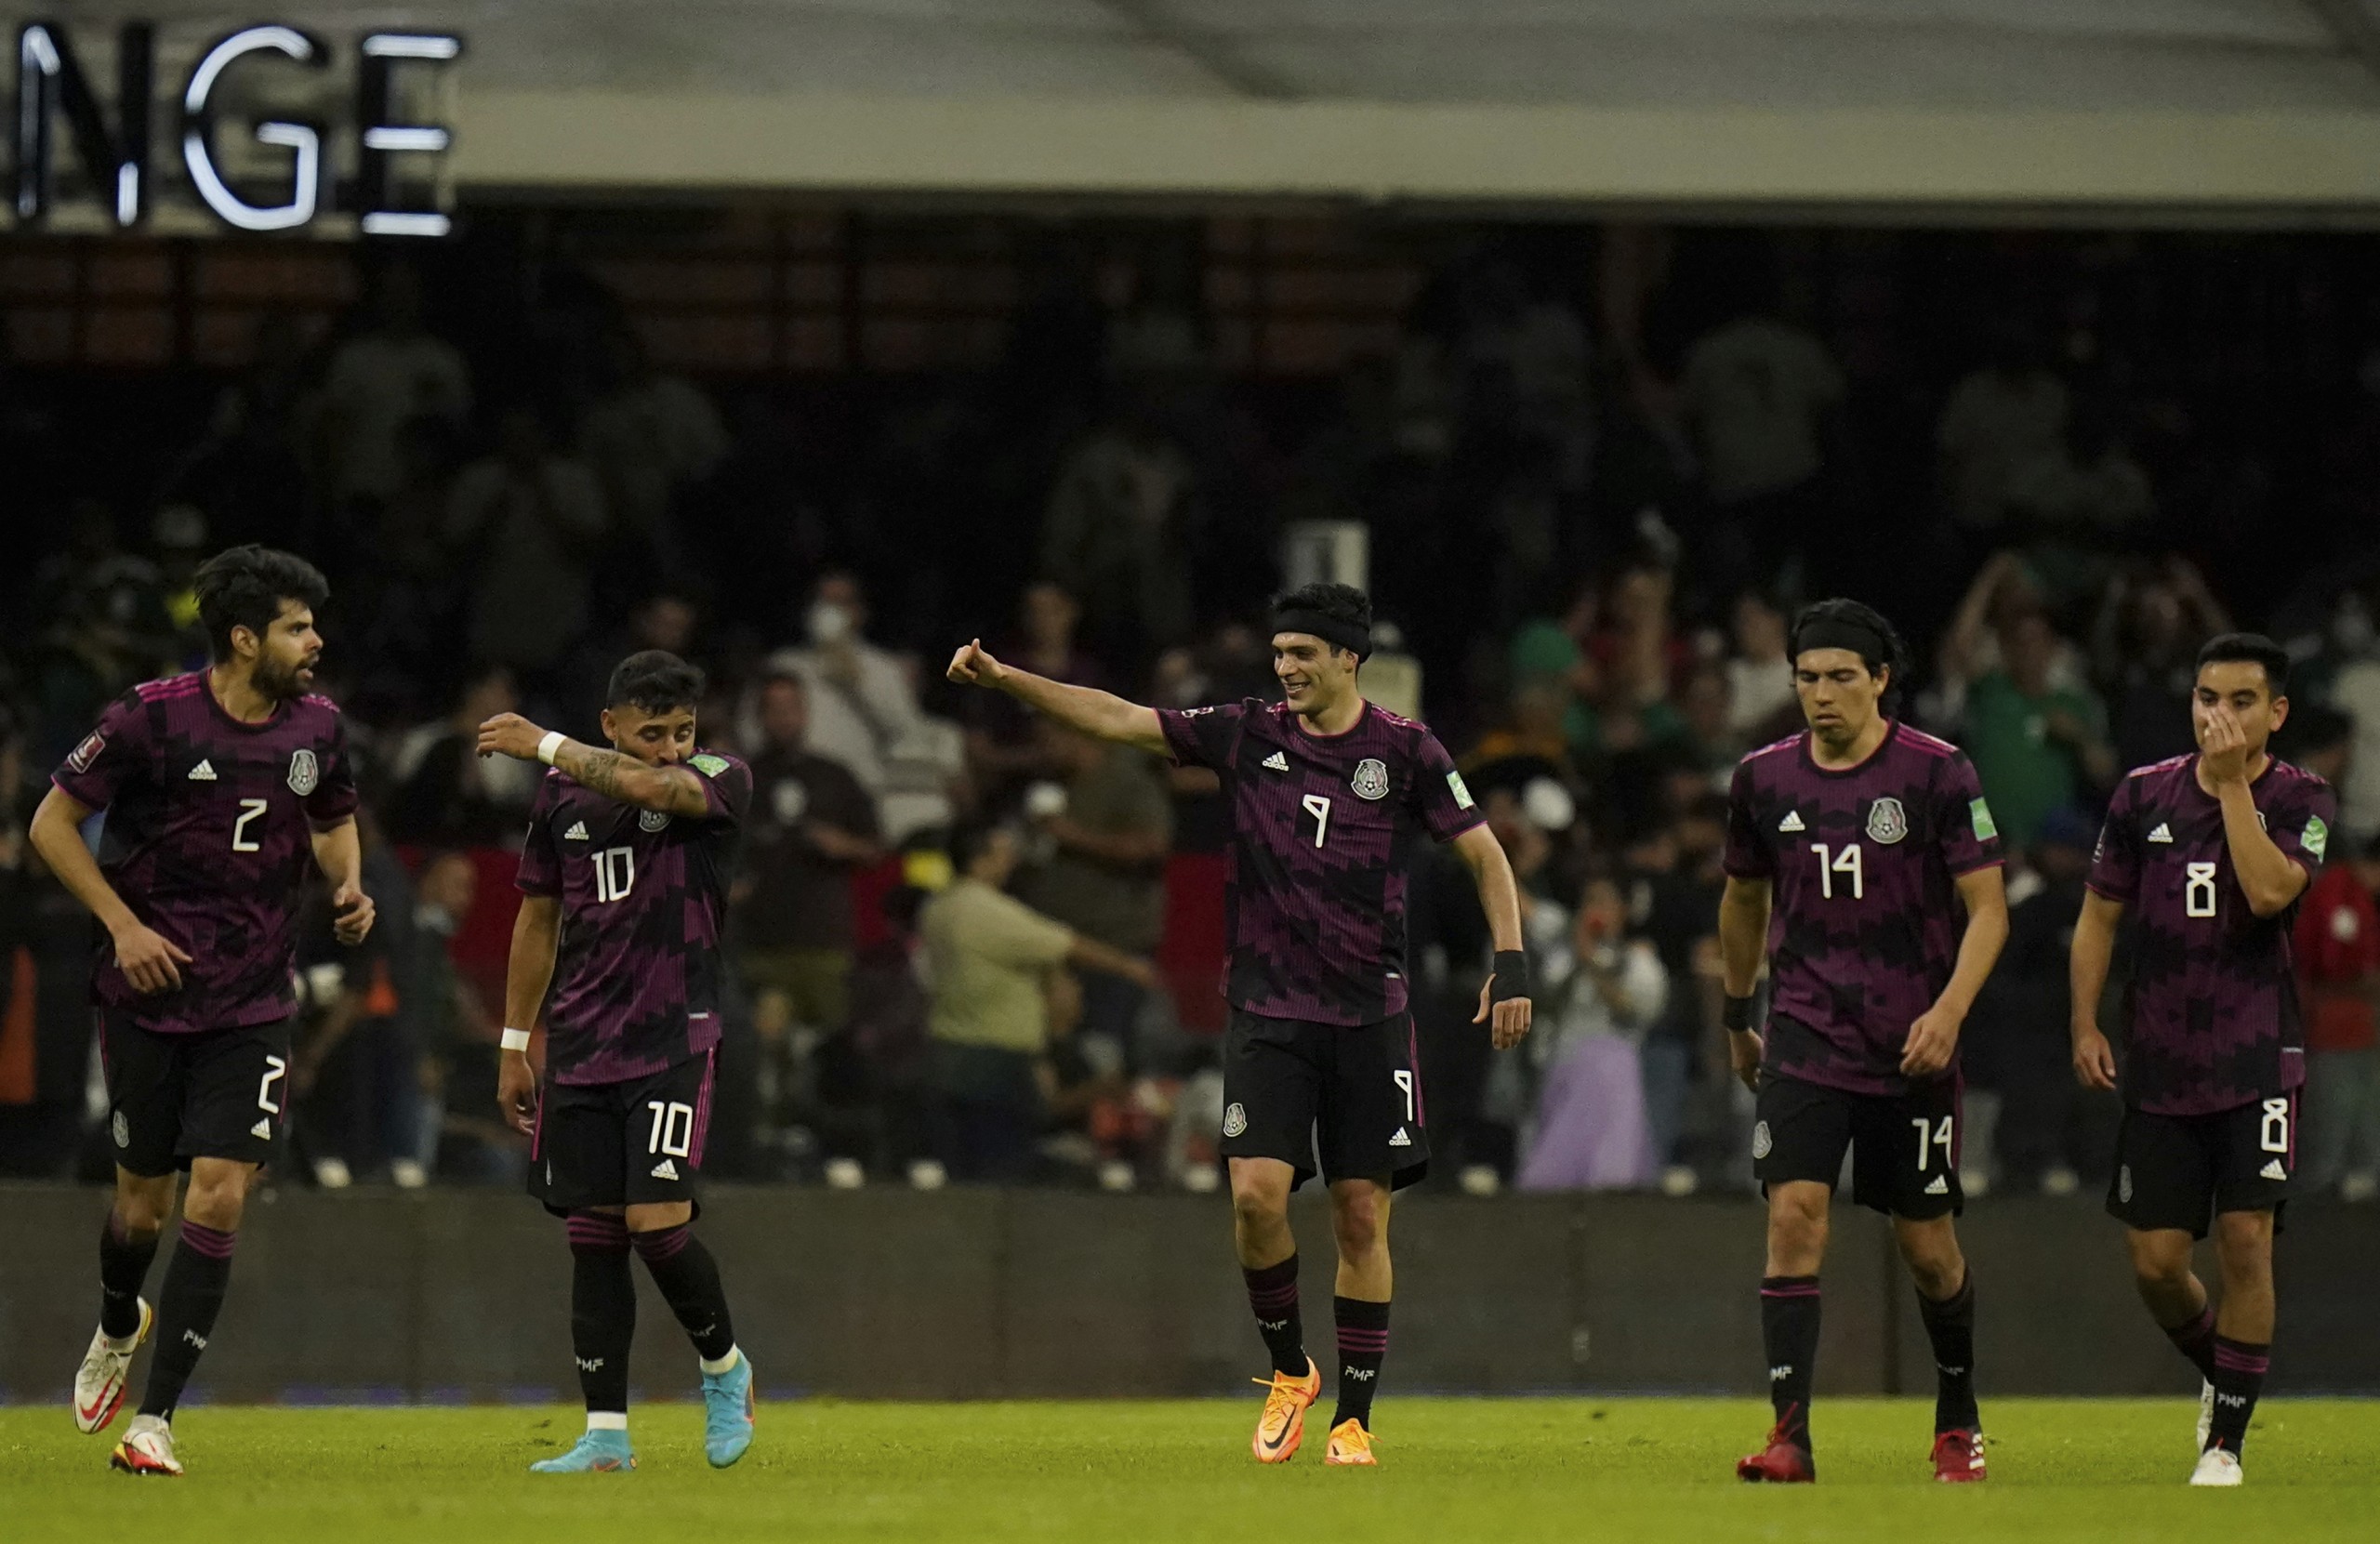 Mexico's Raul Jimenez, center, celebrates after scoring his side's second goal against El Salvador during a qualifying soccer match for the FIFA World Cup Qatar 2022 in Mexico City, Wednesday, March 30, 2022. (AP Photo/Eduardo Verdugo)